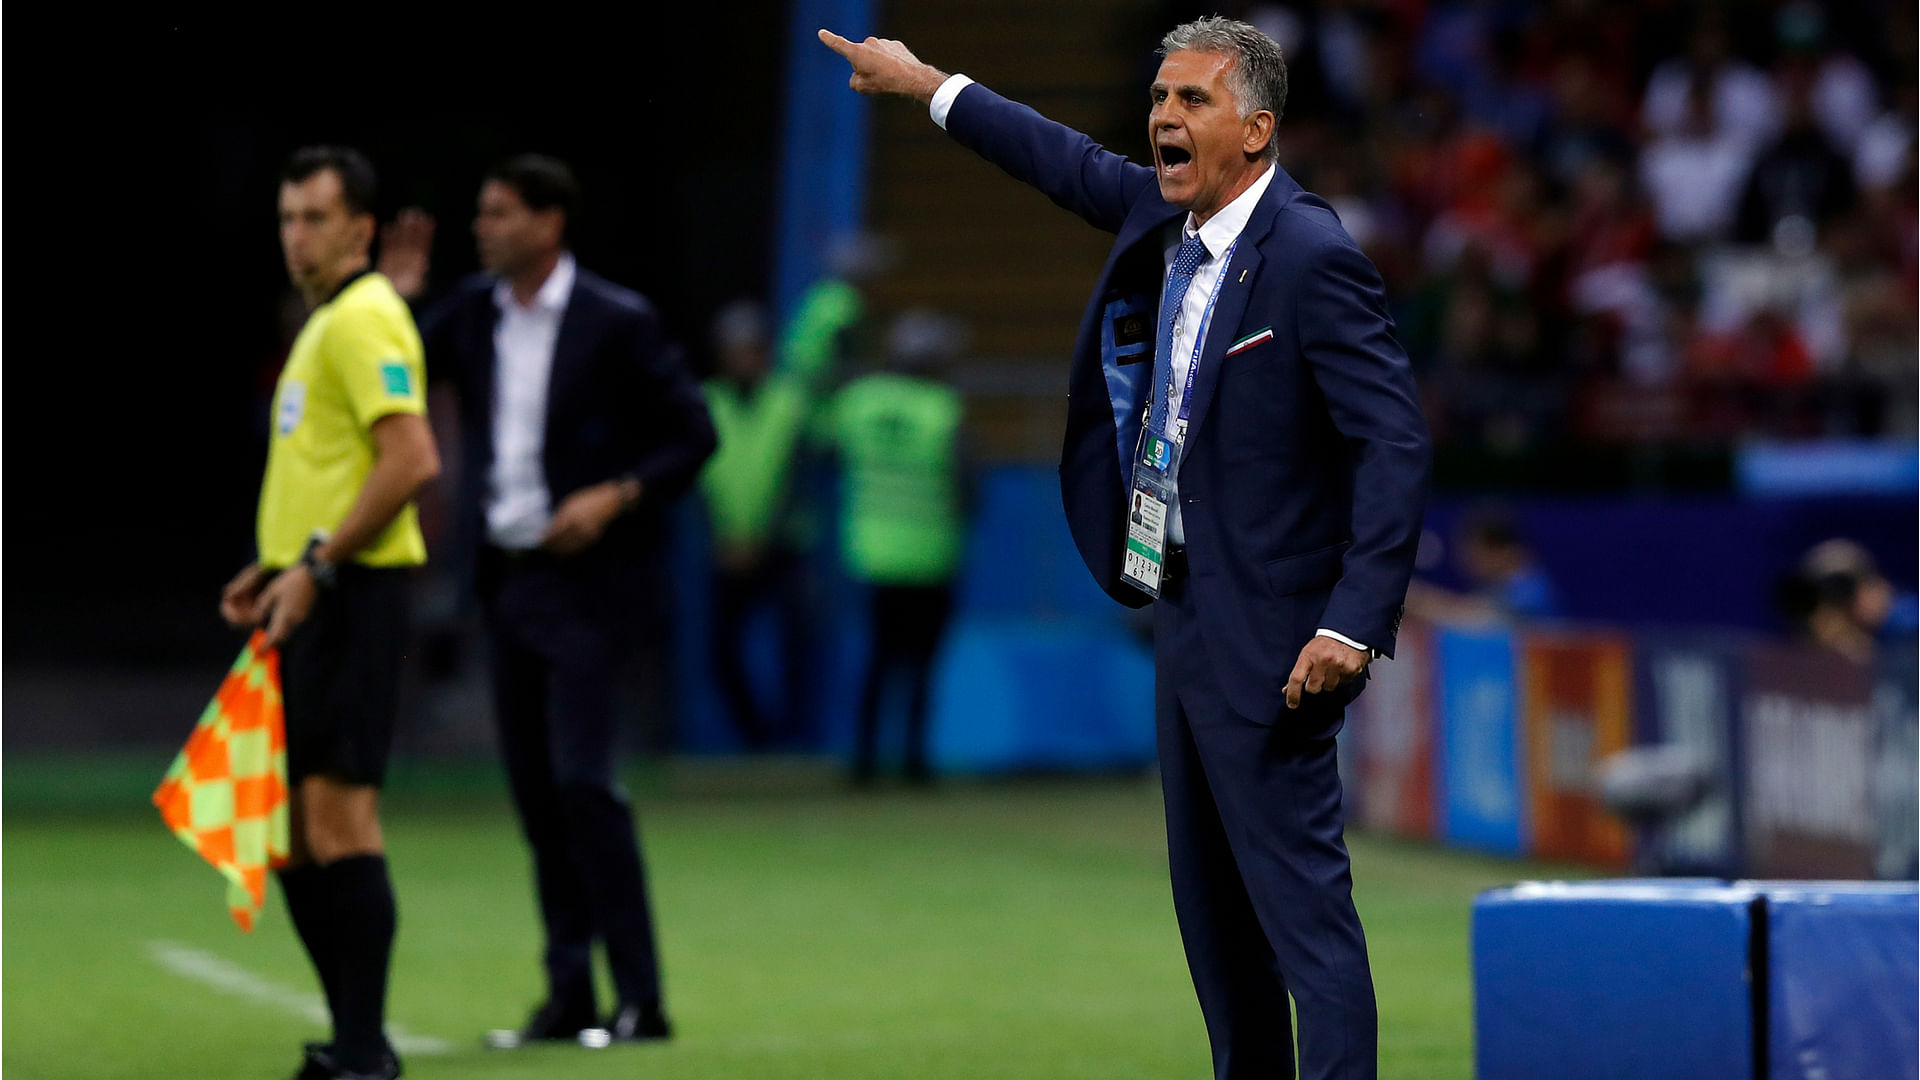 Carlos Queiroz, the Portuguese coach of the Iranian National Team, will look to qualify&nbsp; by beating his native country